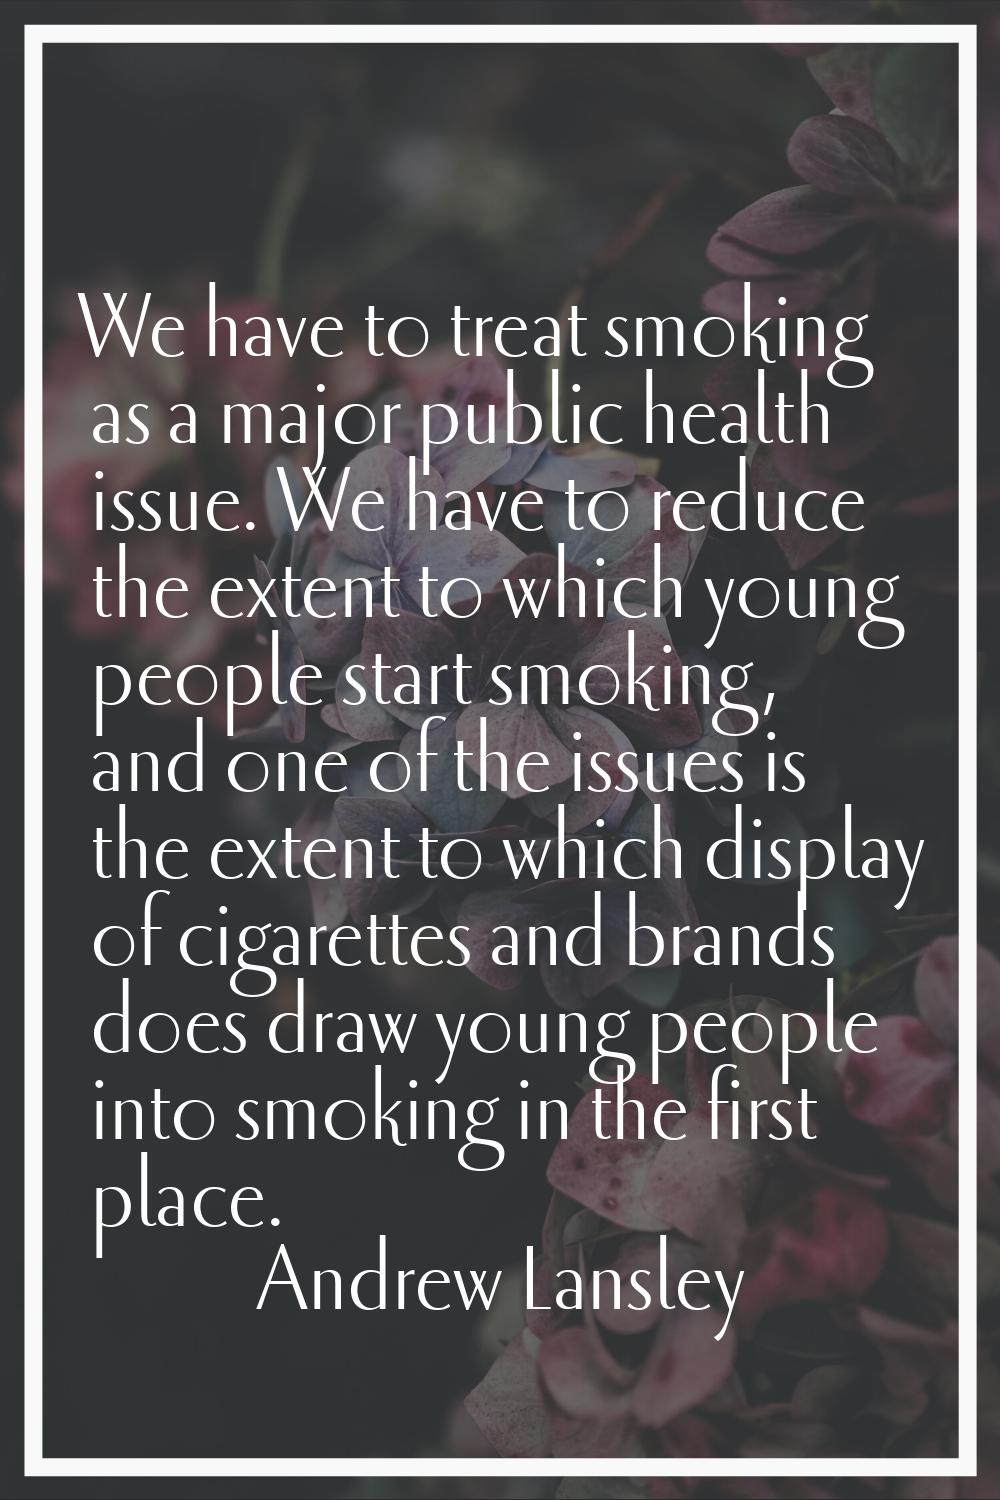 We have to treat smoking as a major public health issue. We have to reduce the extent to which youn